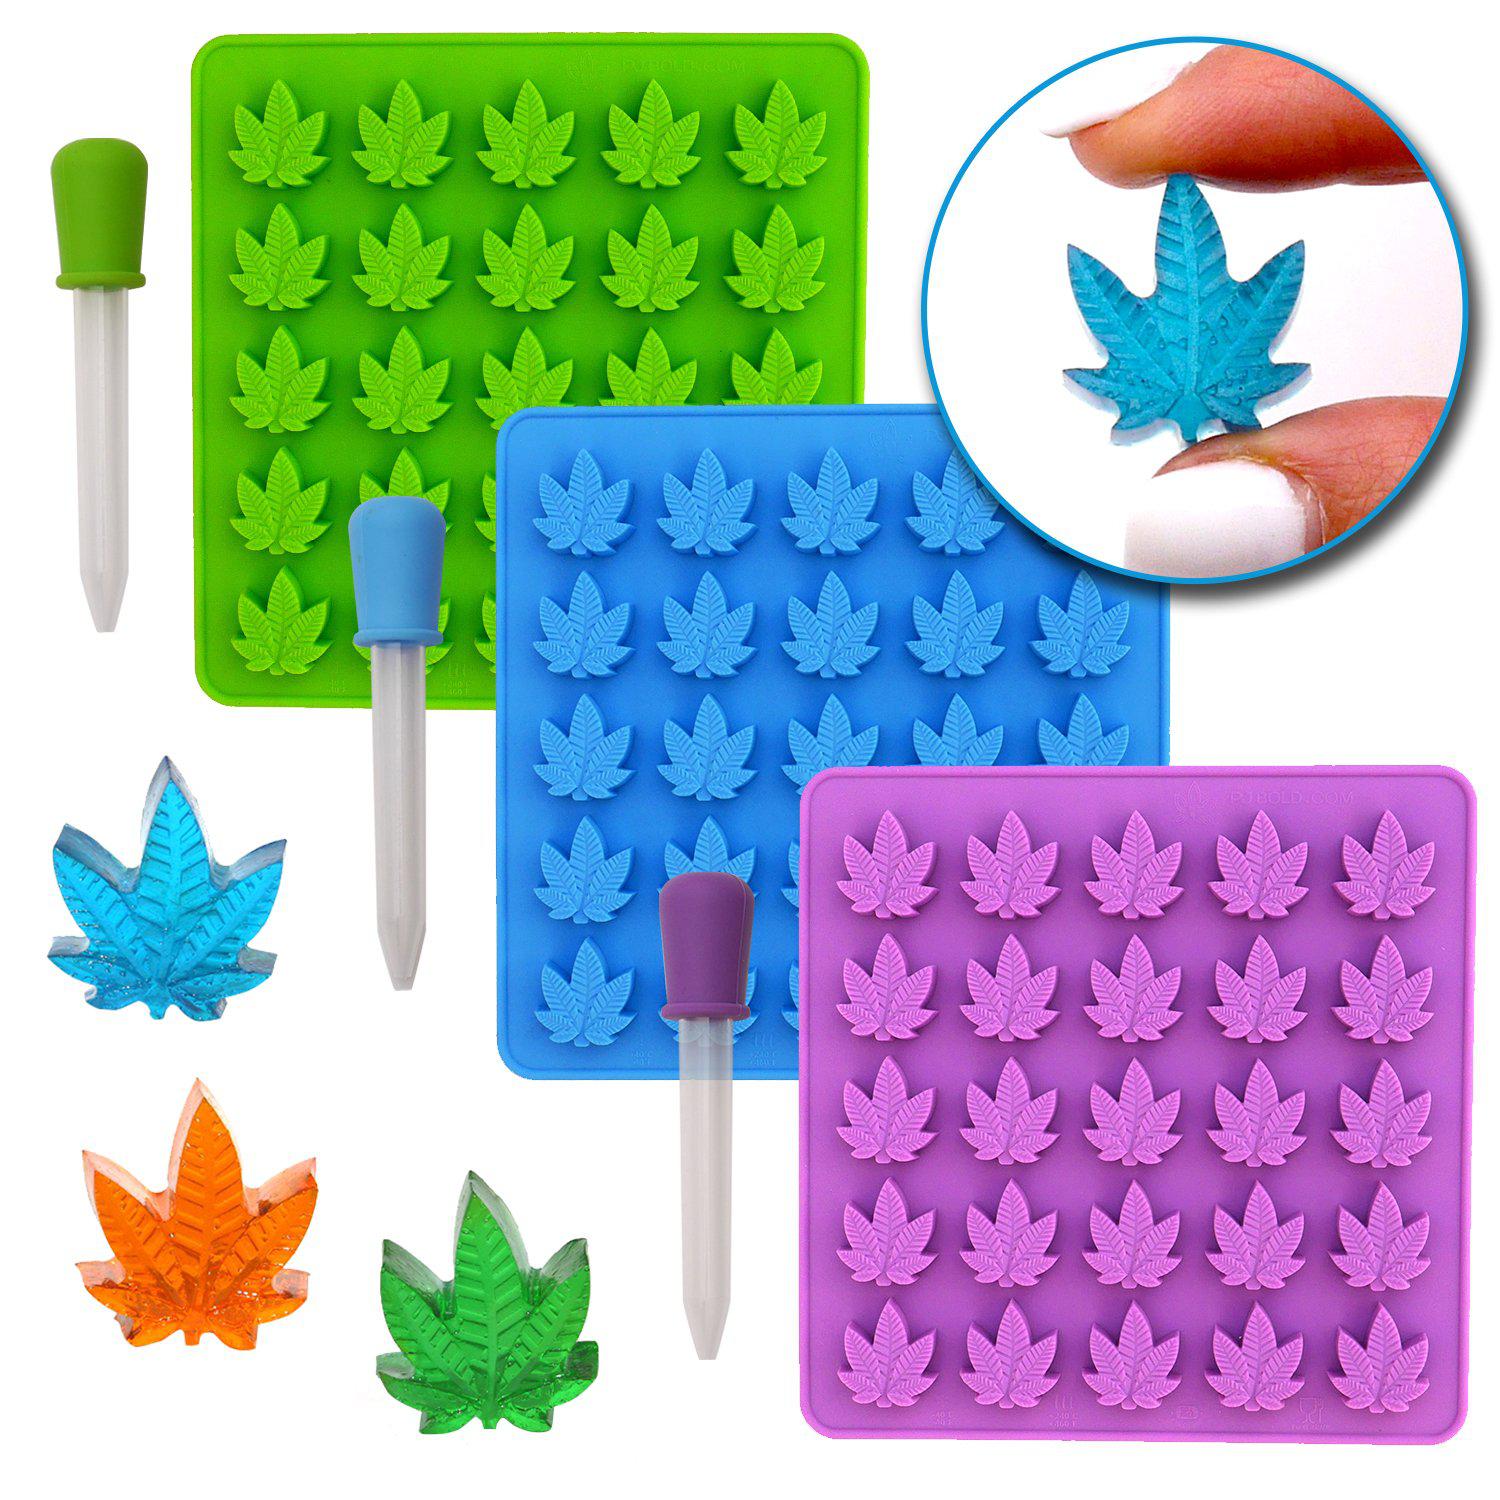 Many Cavities Gummy Candy Molds Silicone Chocolate Gummy Molds With Dropper  Nonstick Food Grade Silicone - Buy Many Cavities Gummy Candy Molds Silicone  Chocolate Gummy Molds With Dropper Nonstick Food Grade Silicone